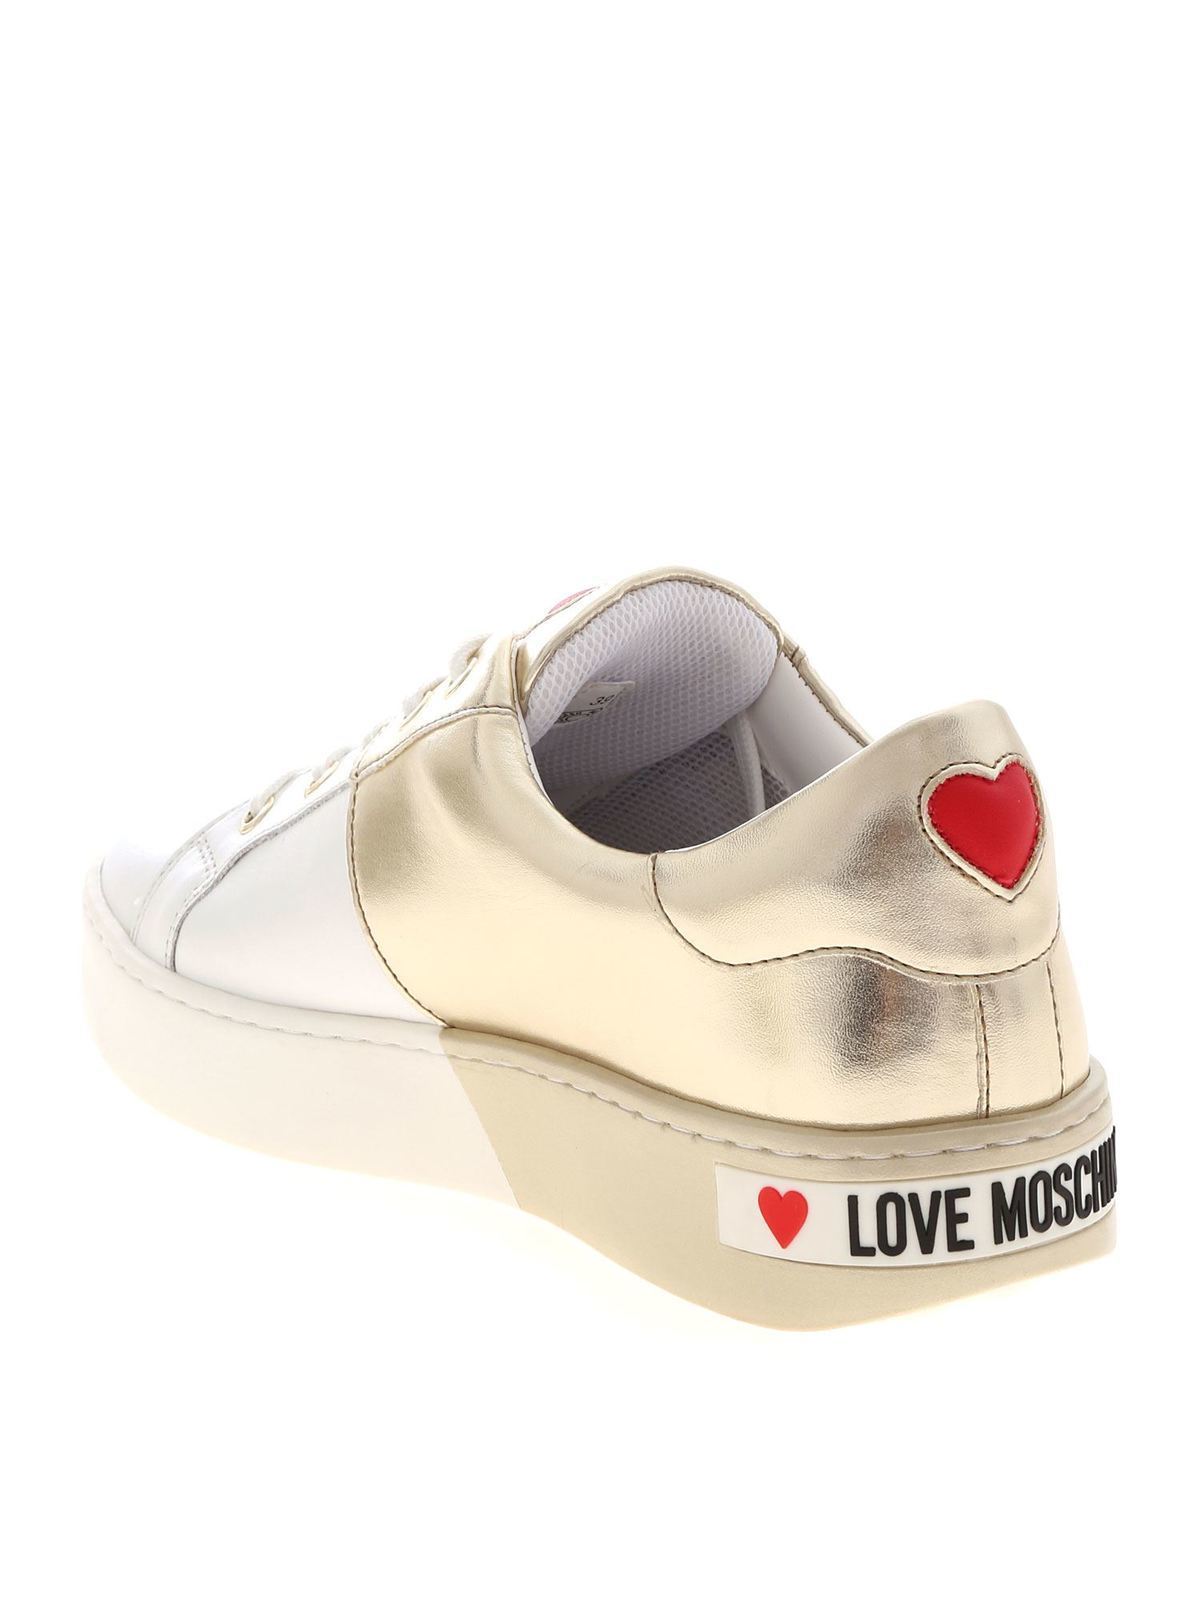 Vaag Habubu Nieuwe betekenis Trainers Love Moschino - Bicolor sneakers in white and gold with logo -  JA15013G1AIF310A